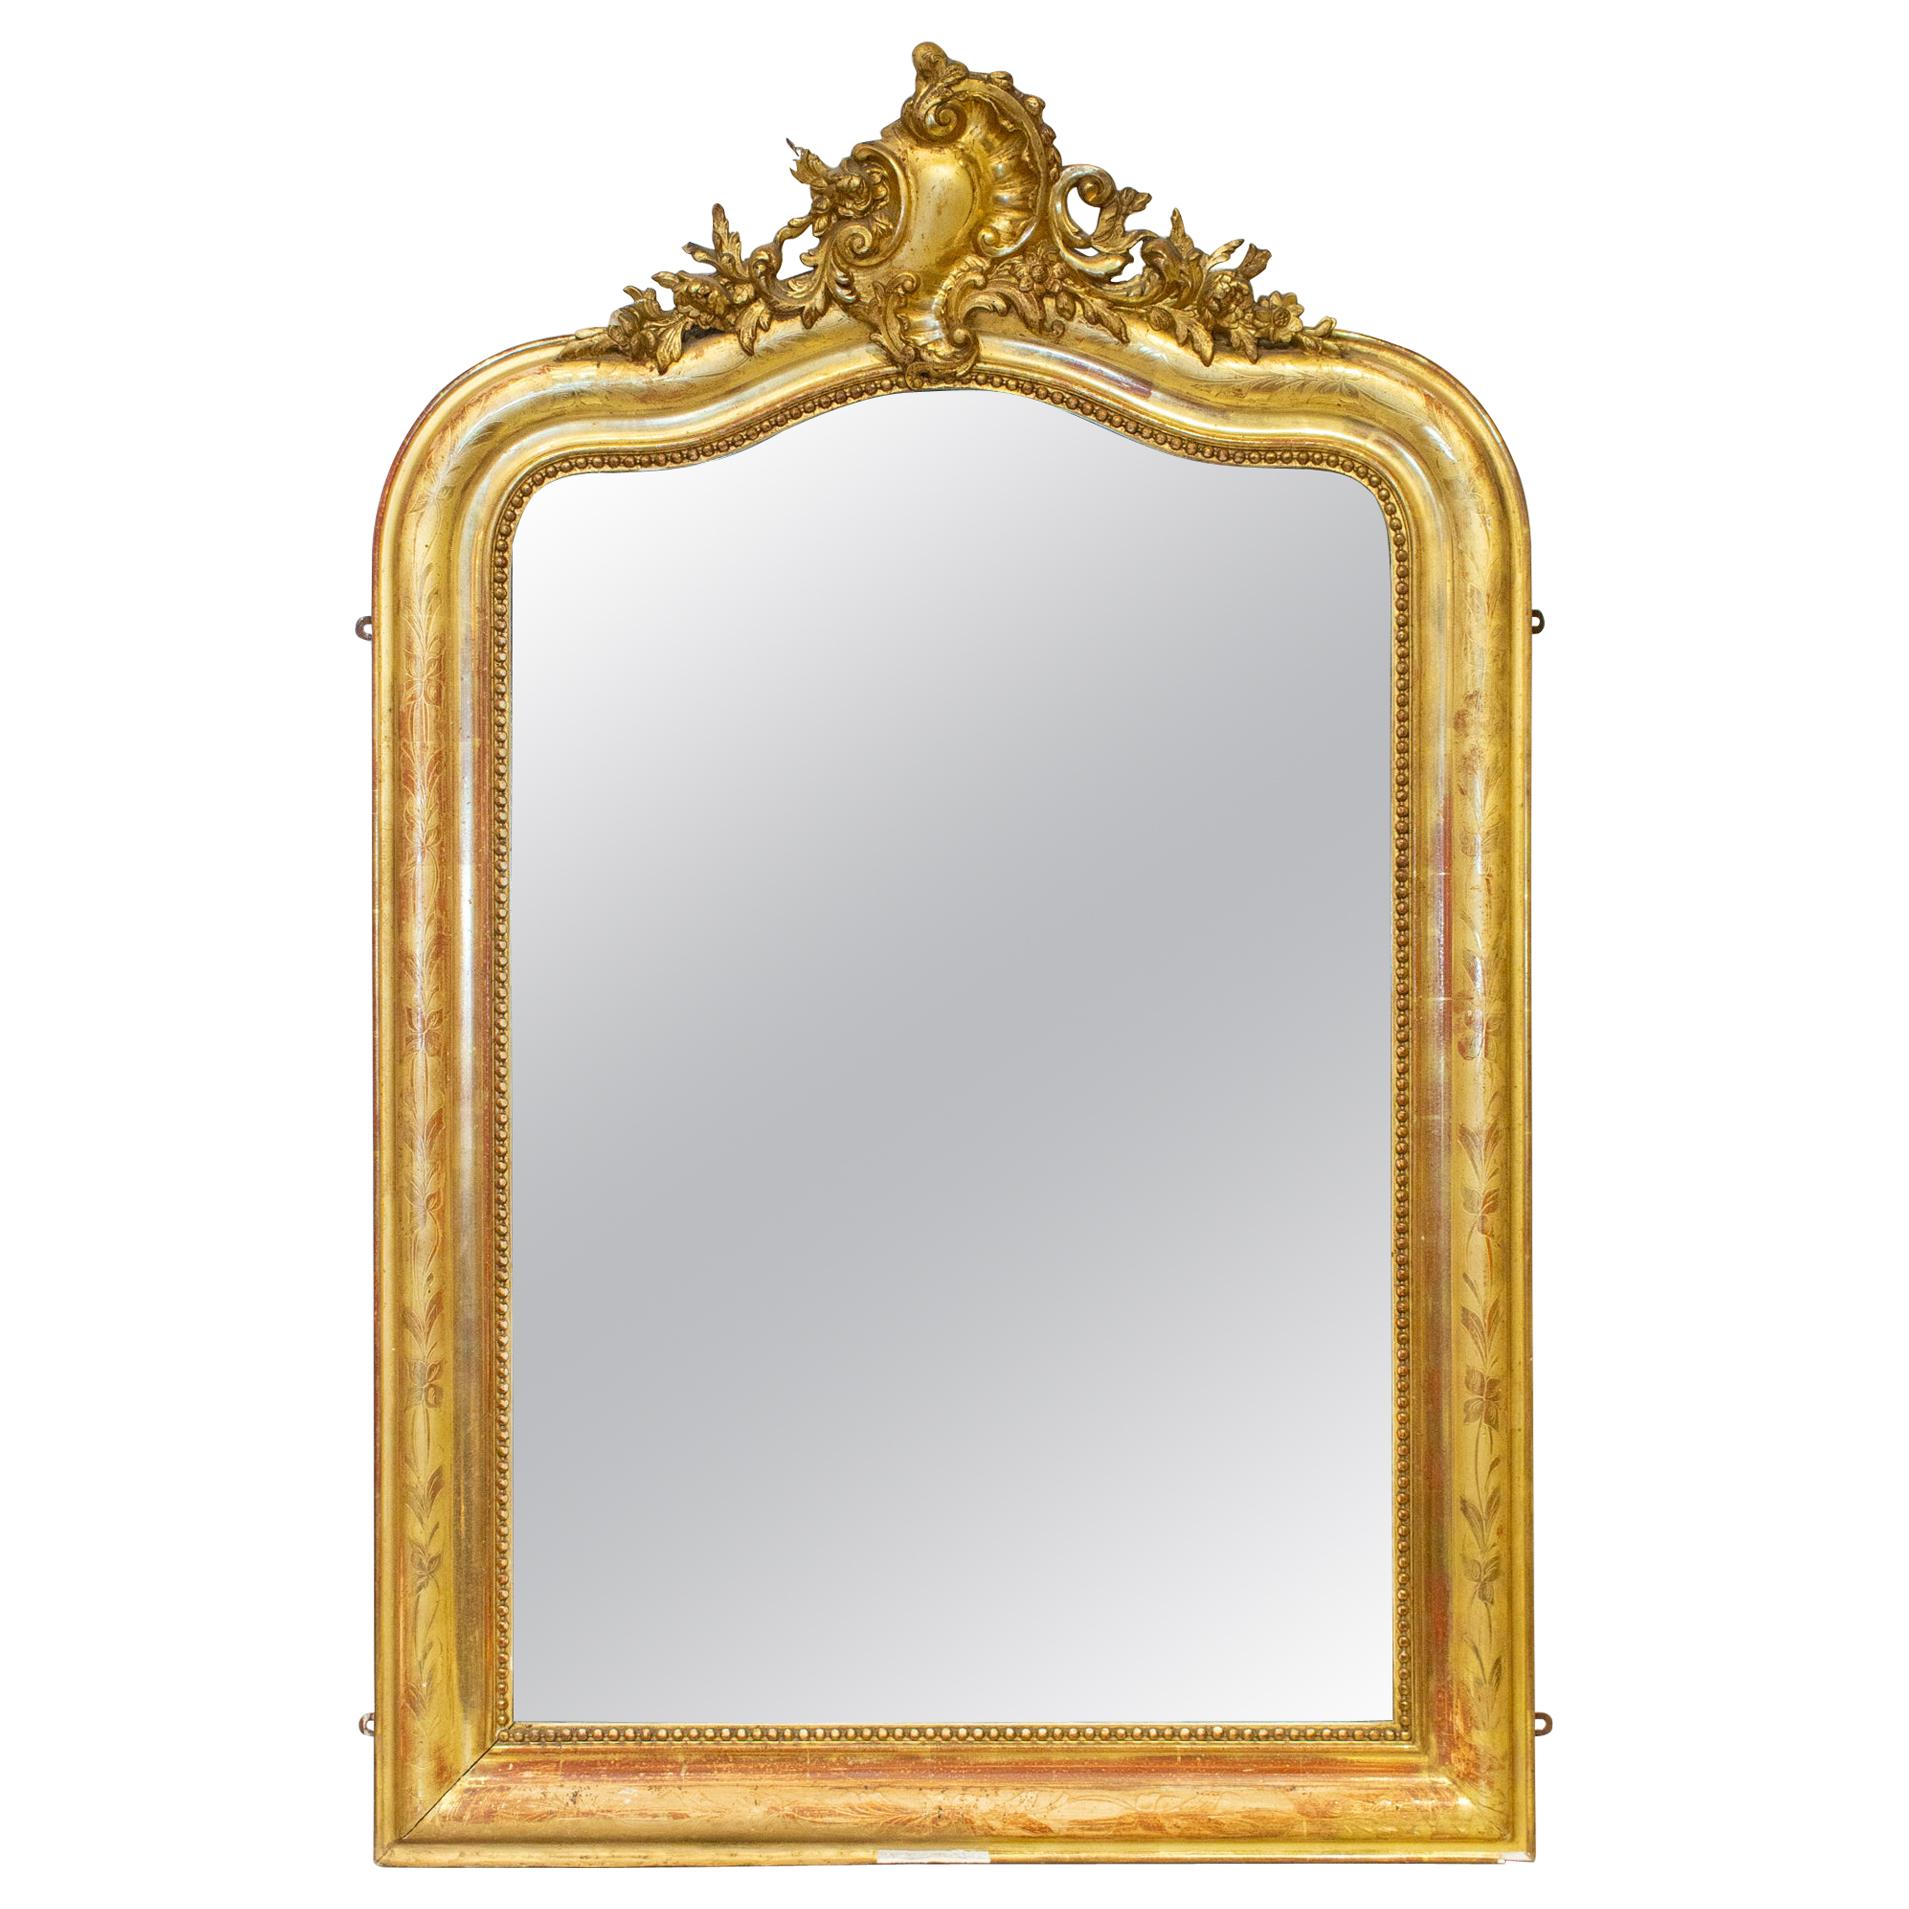 Antique French Louis Philippe Gilt Mirror with Scroll Cartouche & Floral Details For Sale